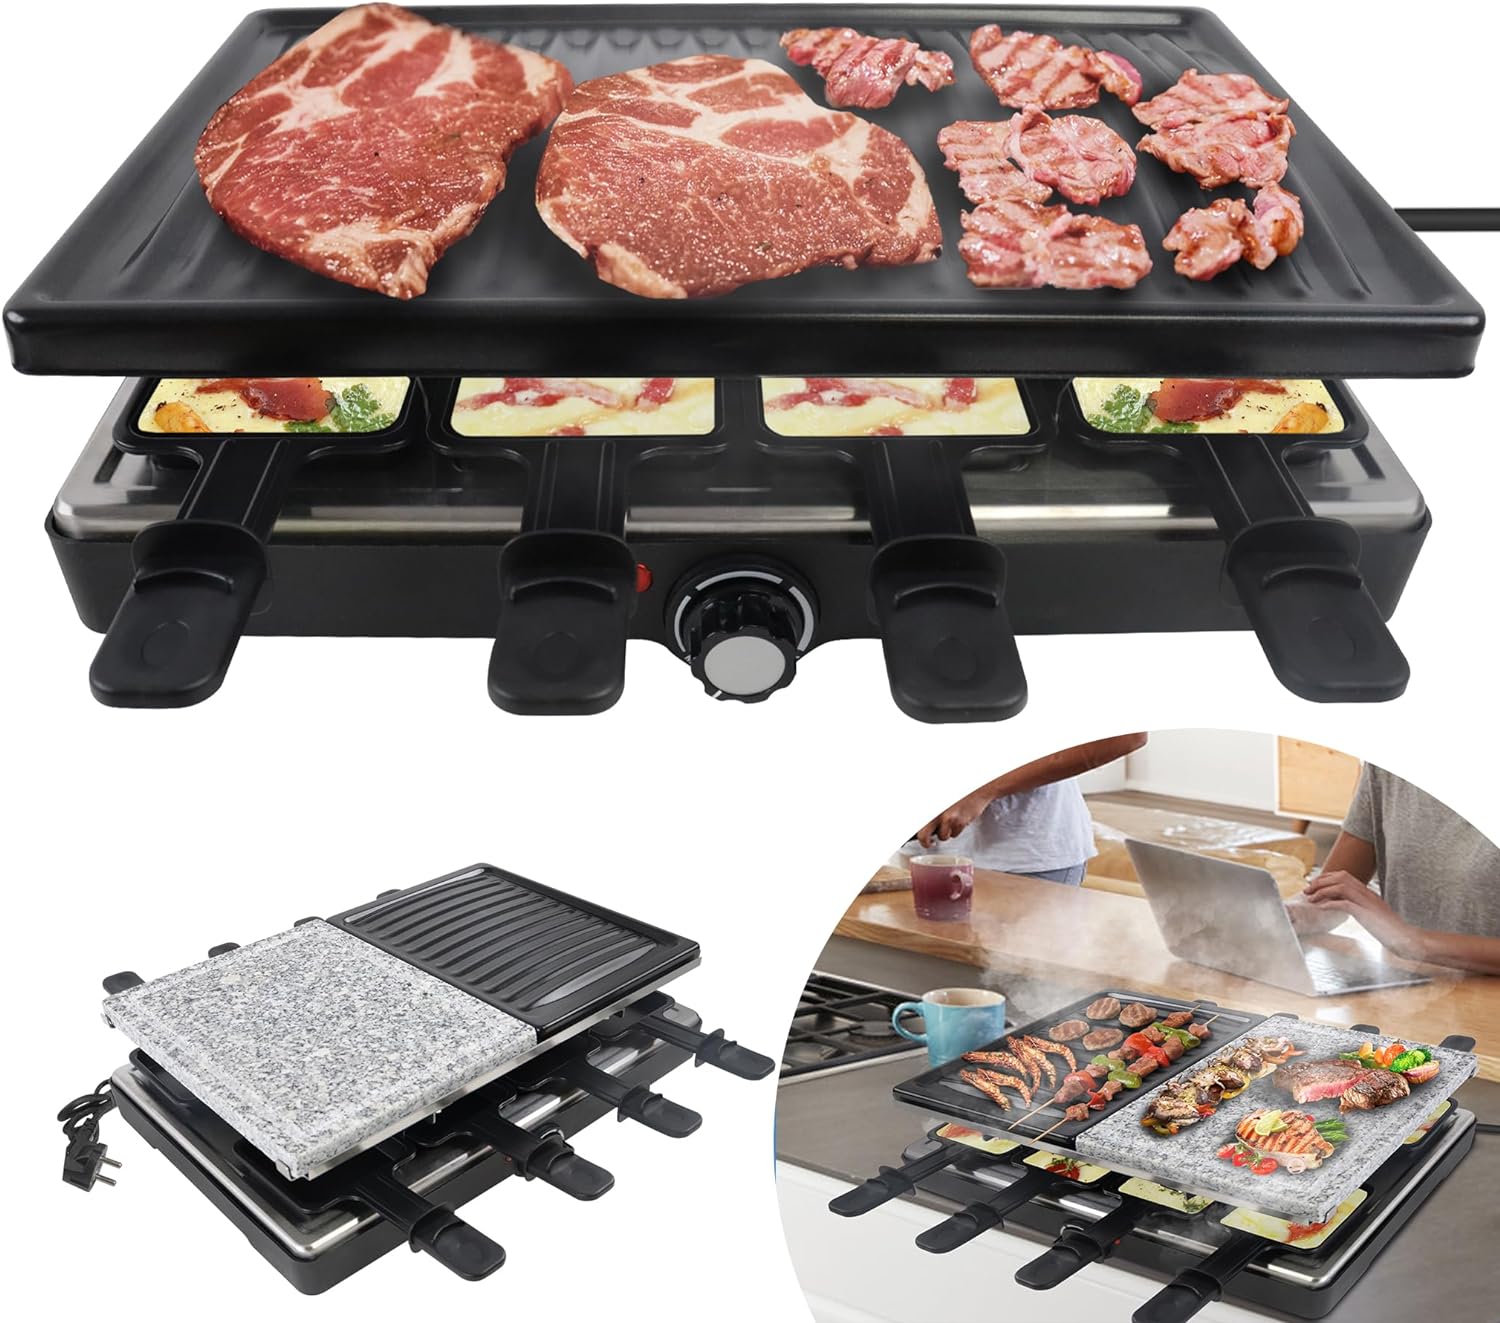 YRHome Raclette Grill for 8 People, Multi-Grill with Stone Plate and Grill Plate, 1400 W Table Grill, 8 Pans and Wooden Spatula, Continuously Adjustable Temperature, Electric Grill for Indoor Barbecue